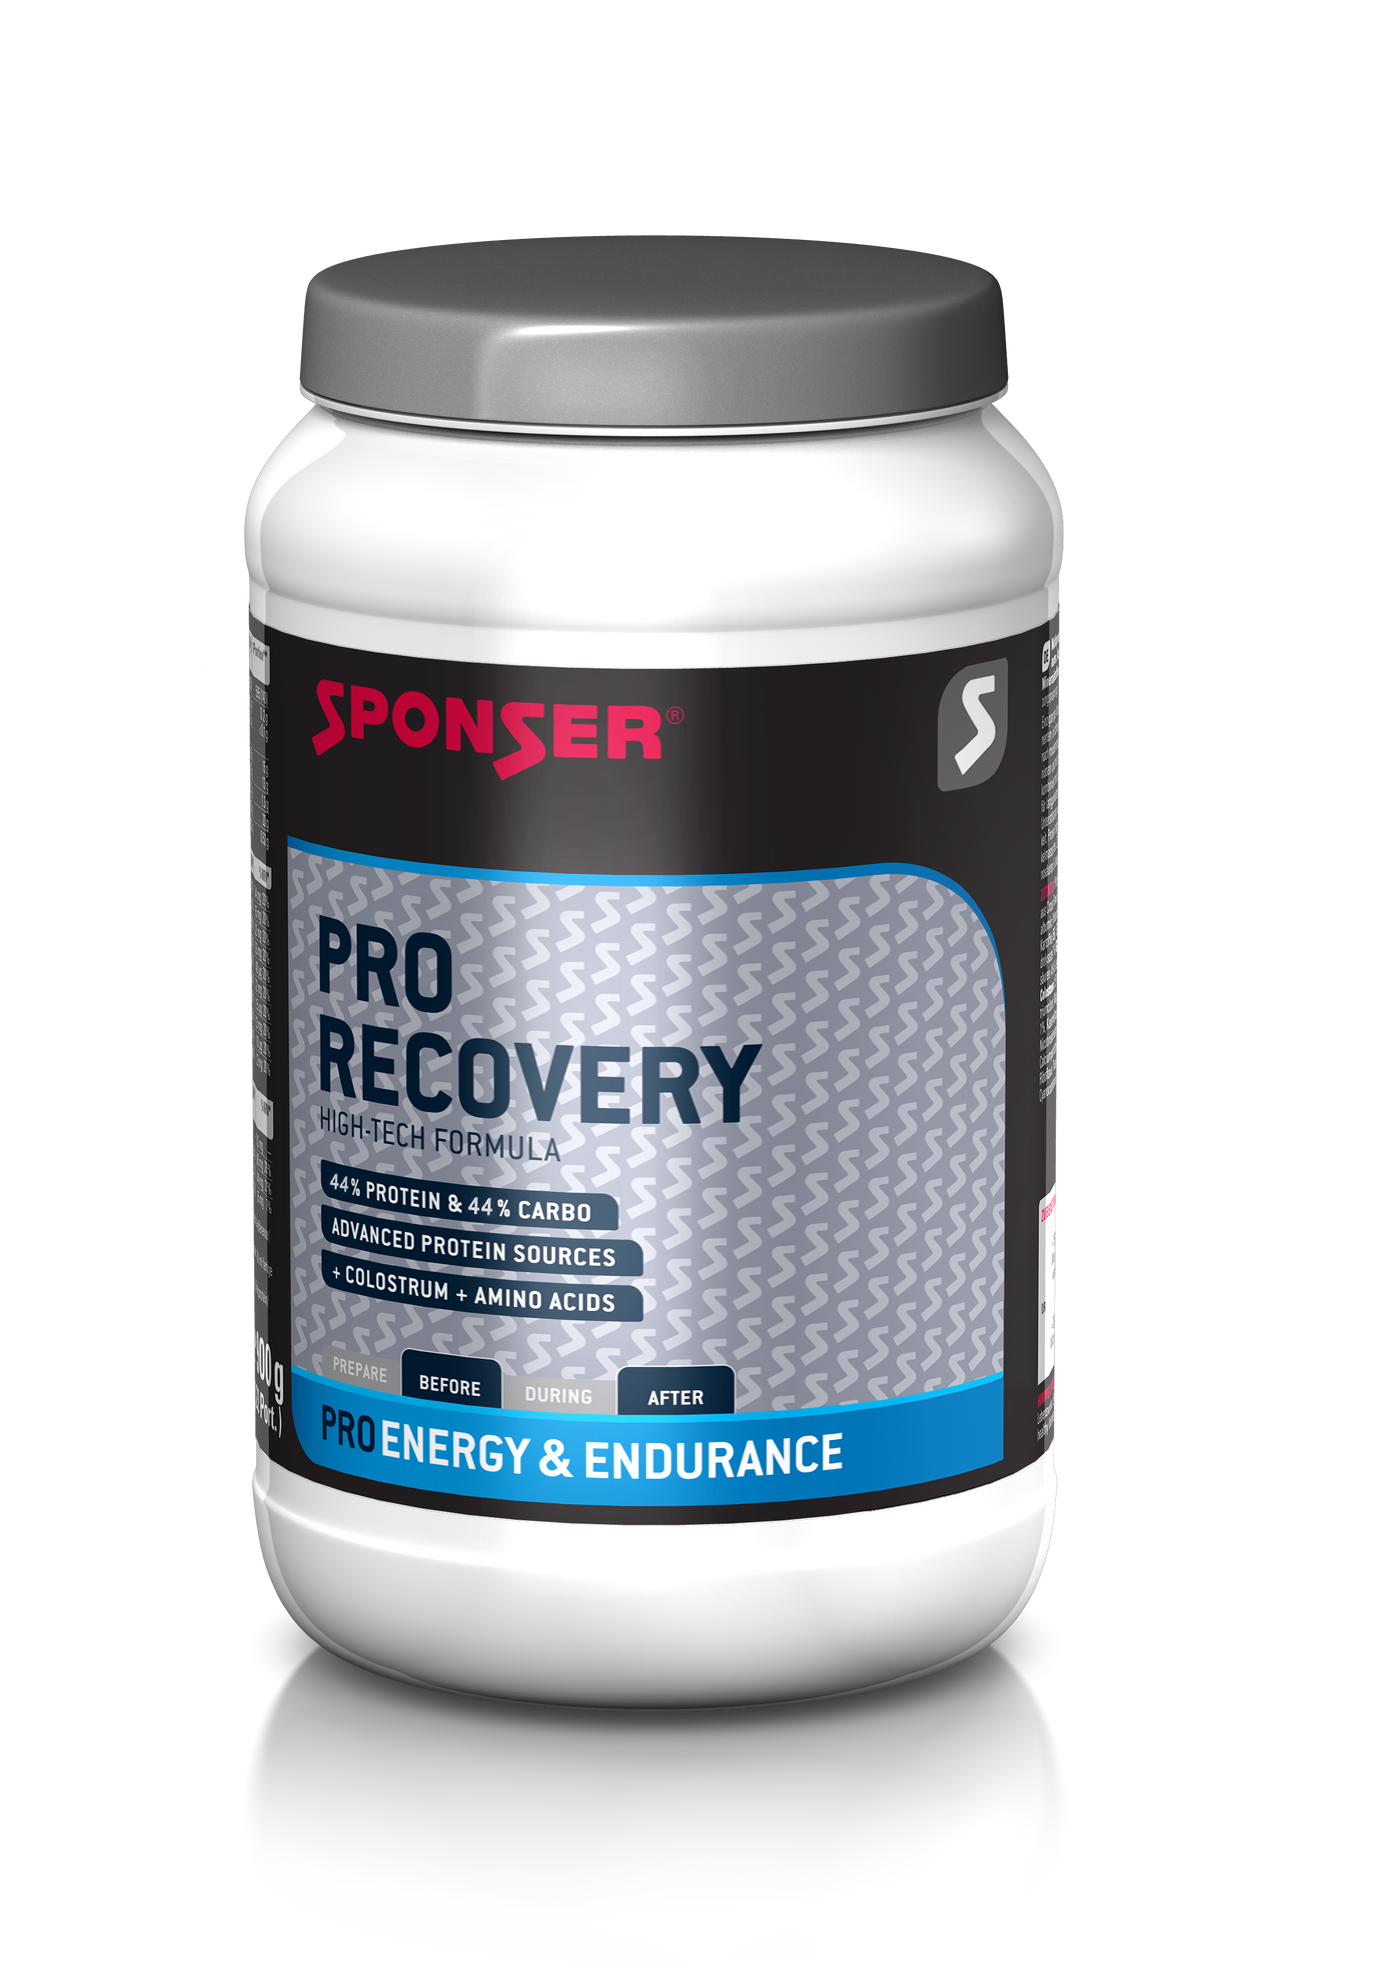 Sponser Power 44/44 Pro Recovery Chocolate - 800 g